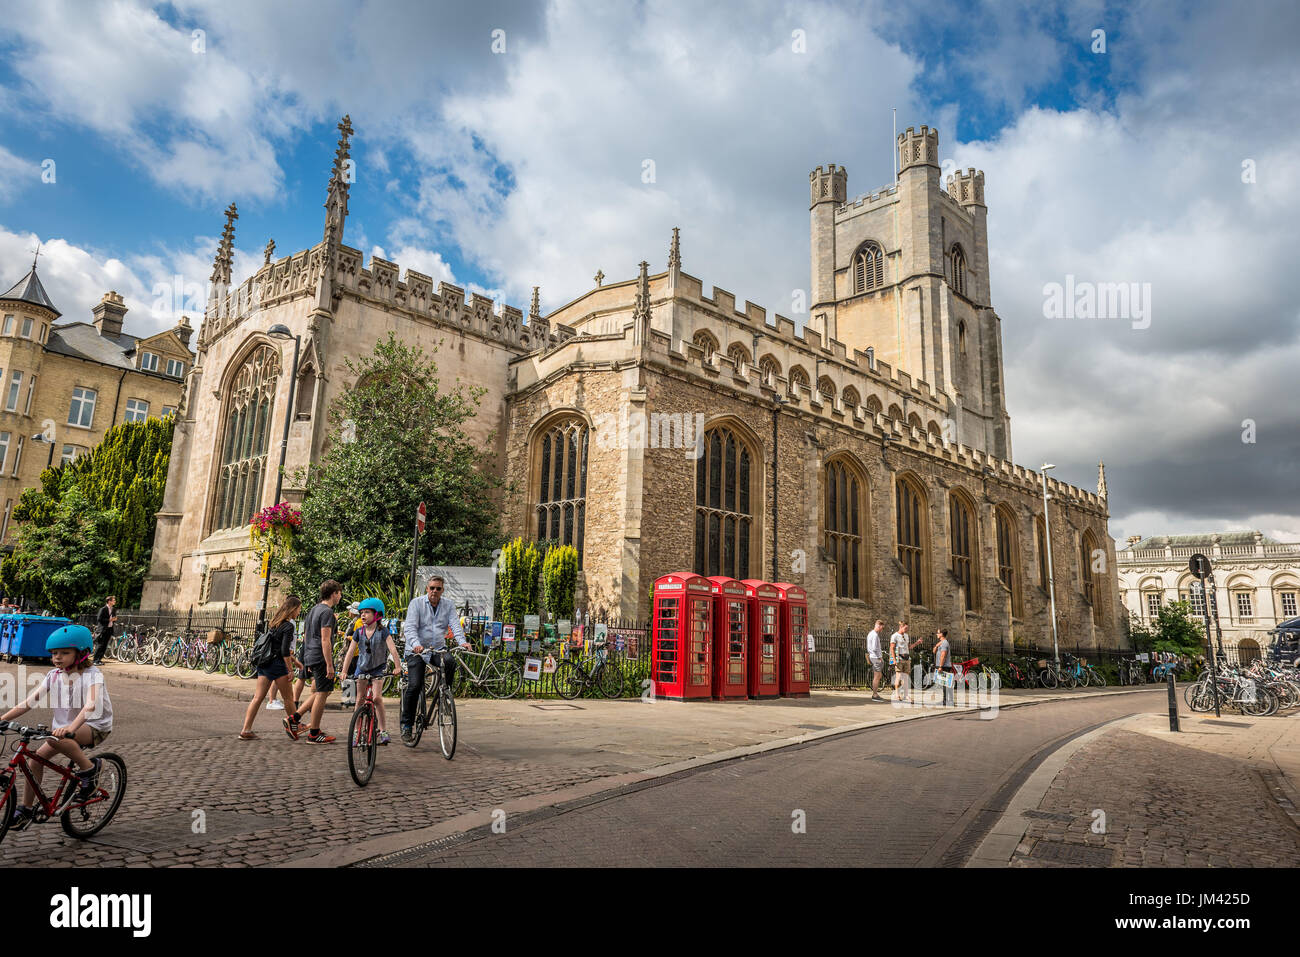 A family on bicycles cycle through Cambridge near the Church of St. Mary's the Great on St. Mary's Street, Cambridge, UK Stock Photo